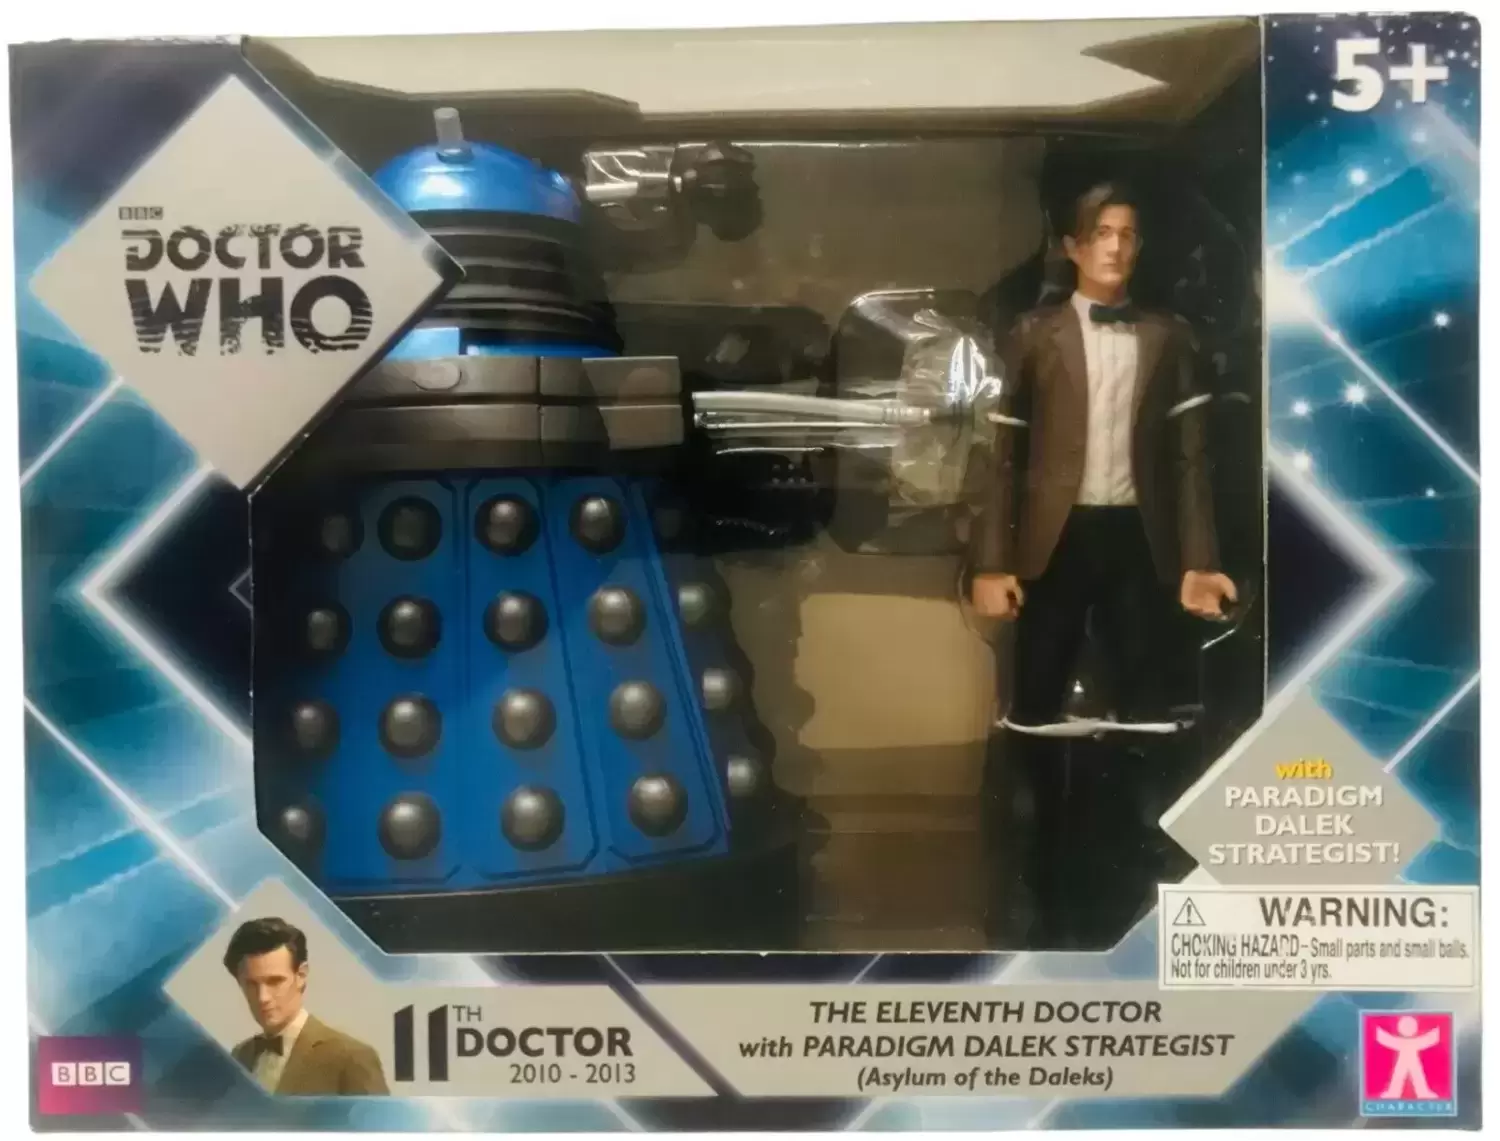 Action Figures - 11th Doctor - Eleventh Doctor with Paradigm Dalek Strategist Asylumof The Daleks